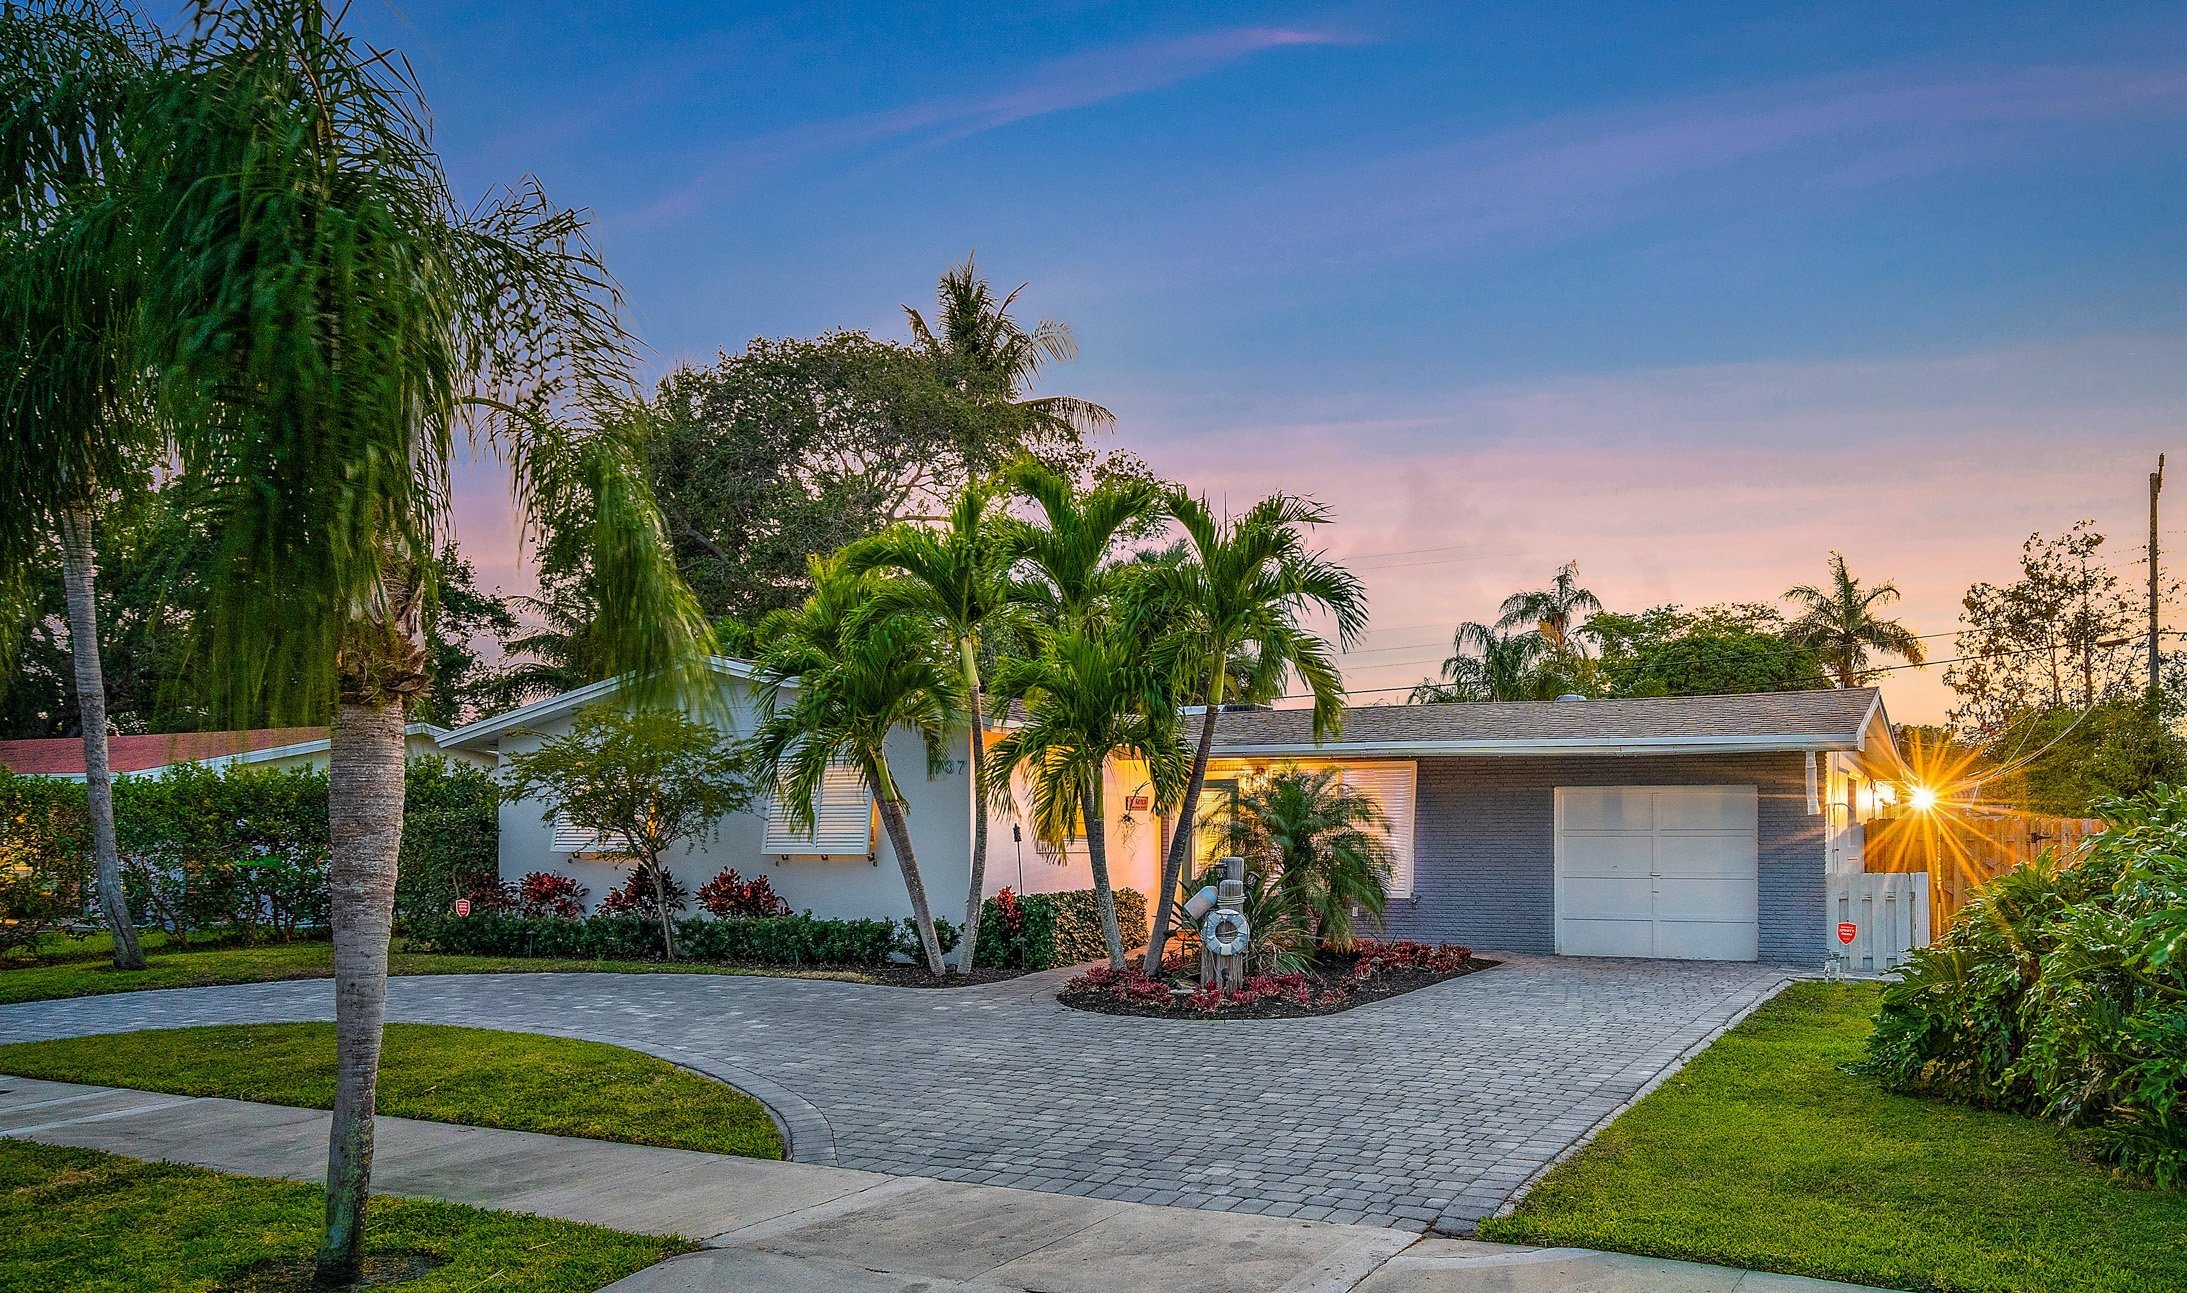 737 Lagoon Drive home for sale in north palm beach